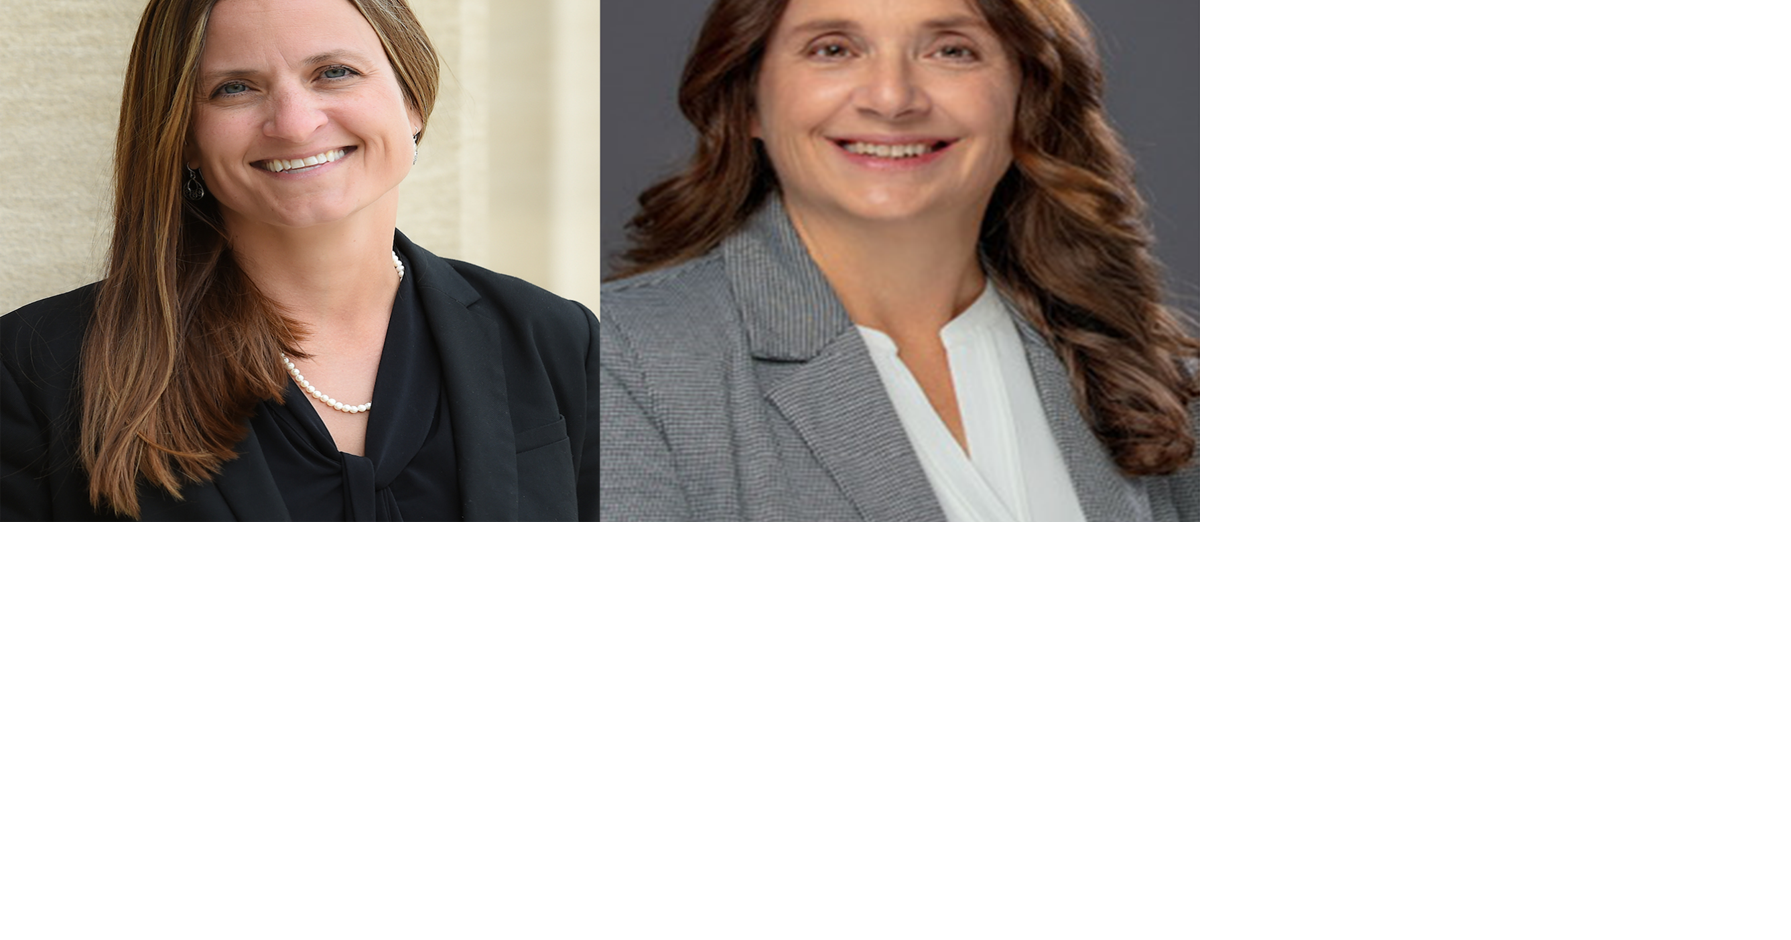 Two facing off for Clinton County Family Court judge seat News